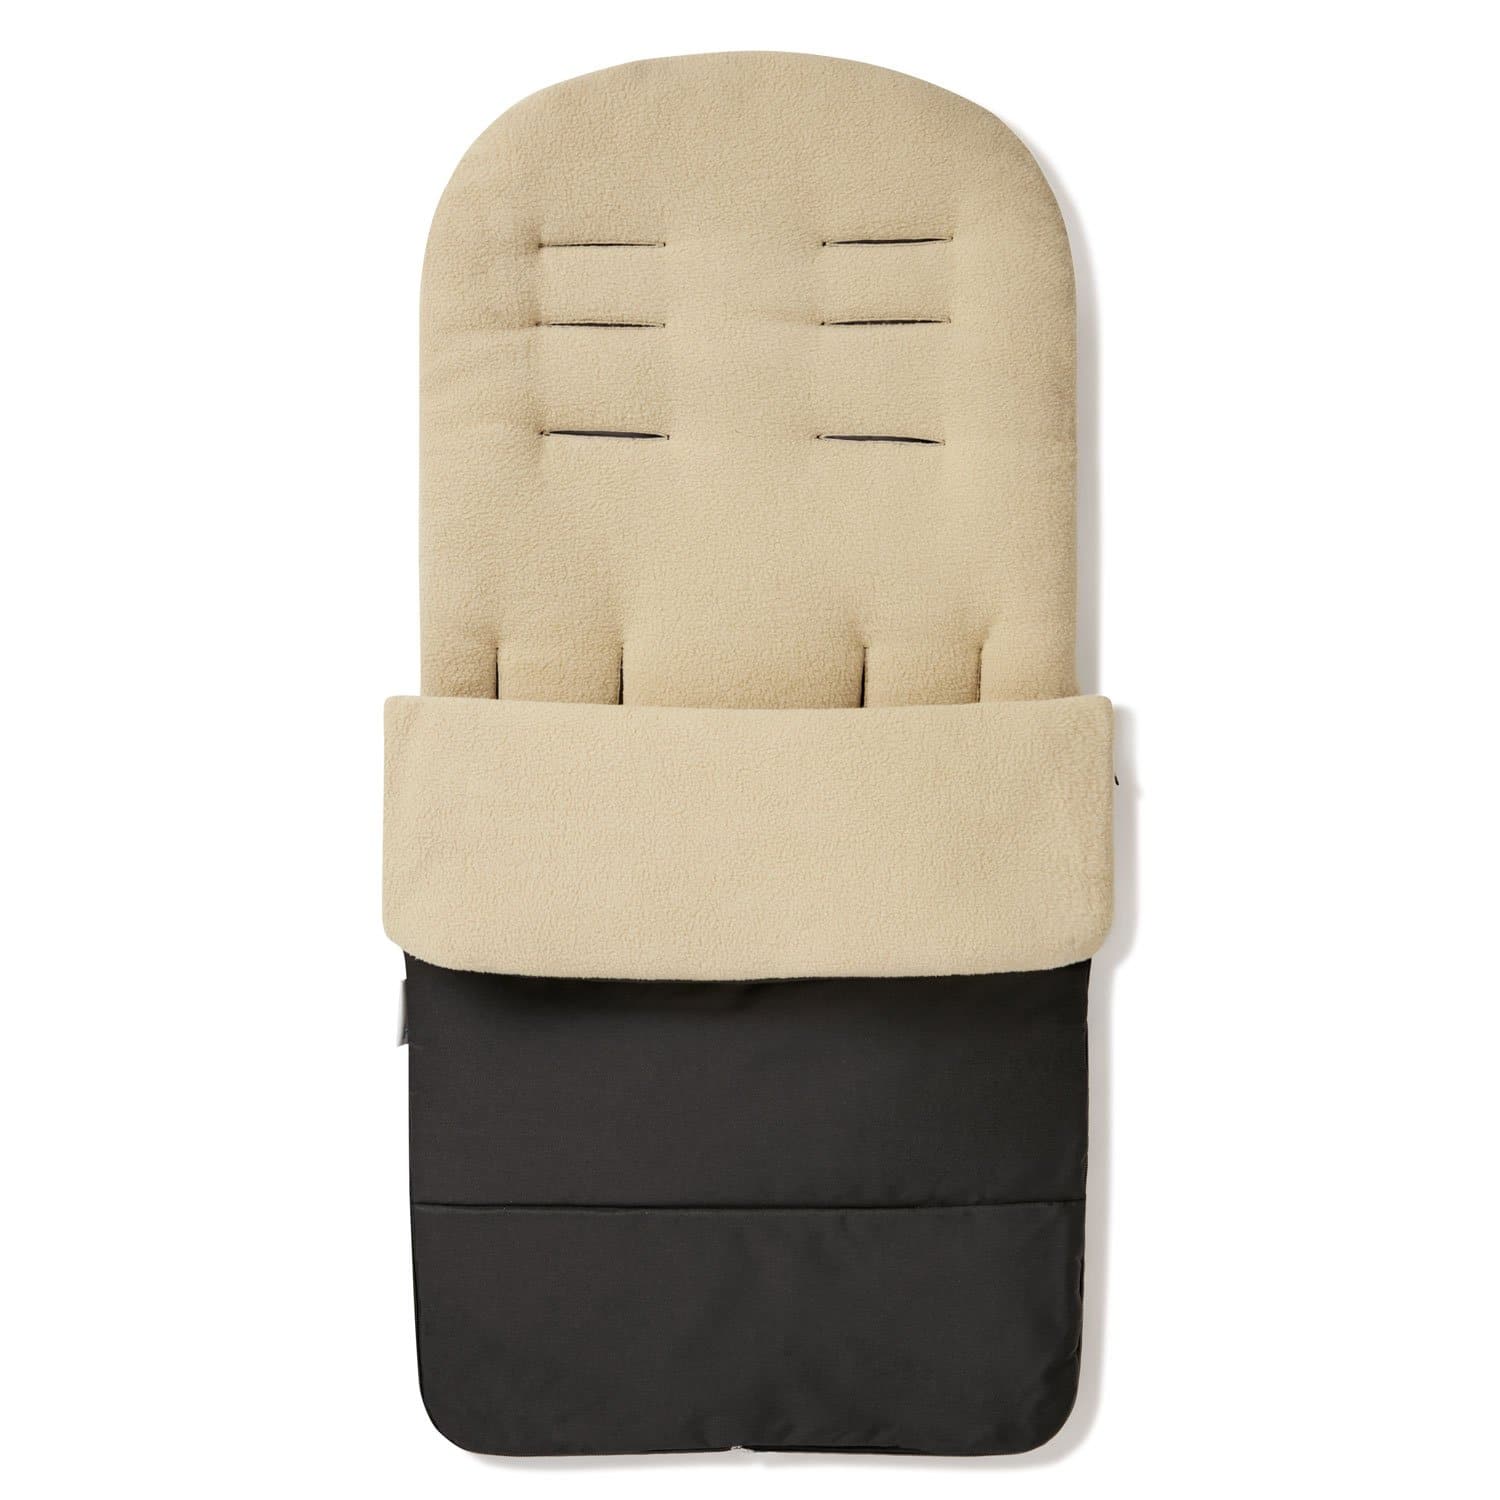 Premium Footmuff / Cosy Toes Compatible with Orbit Baby - Desert Sand / Fits All Models | For Your Little One